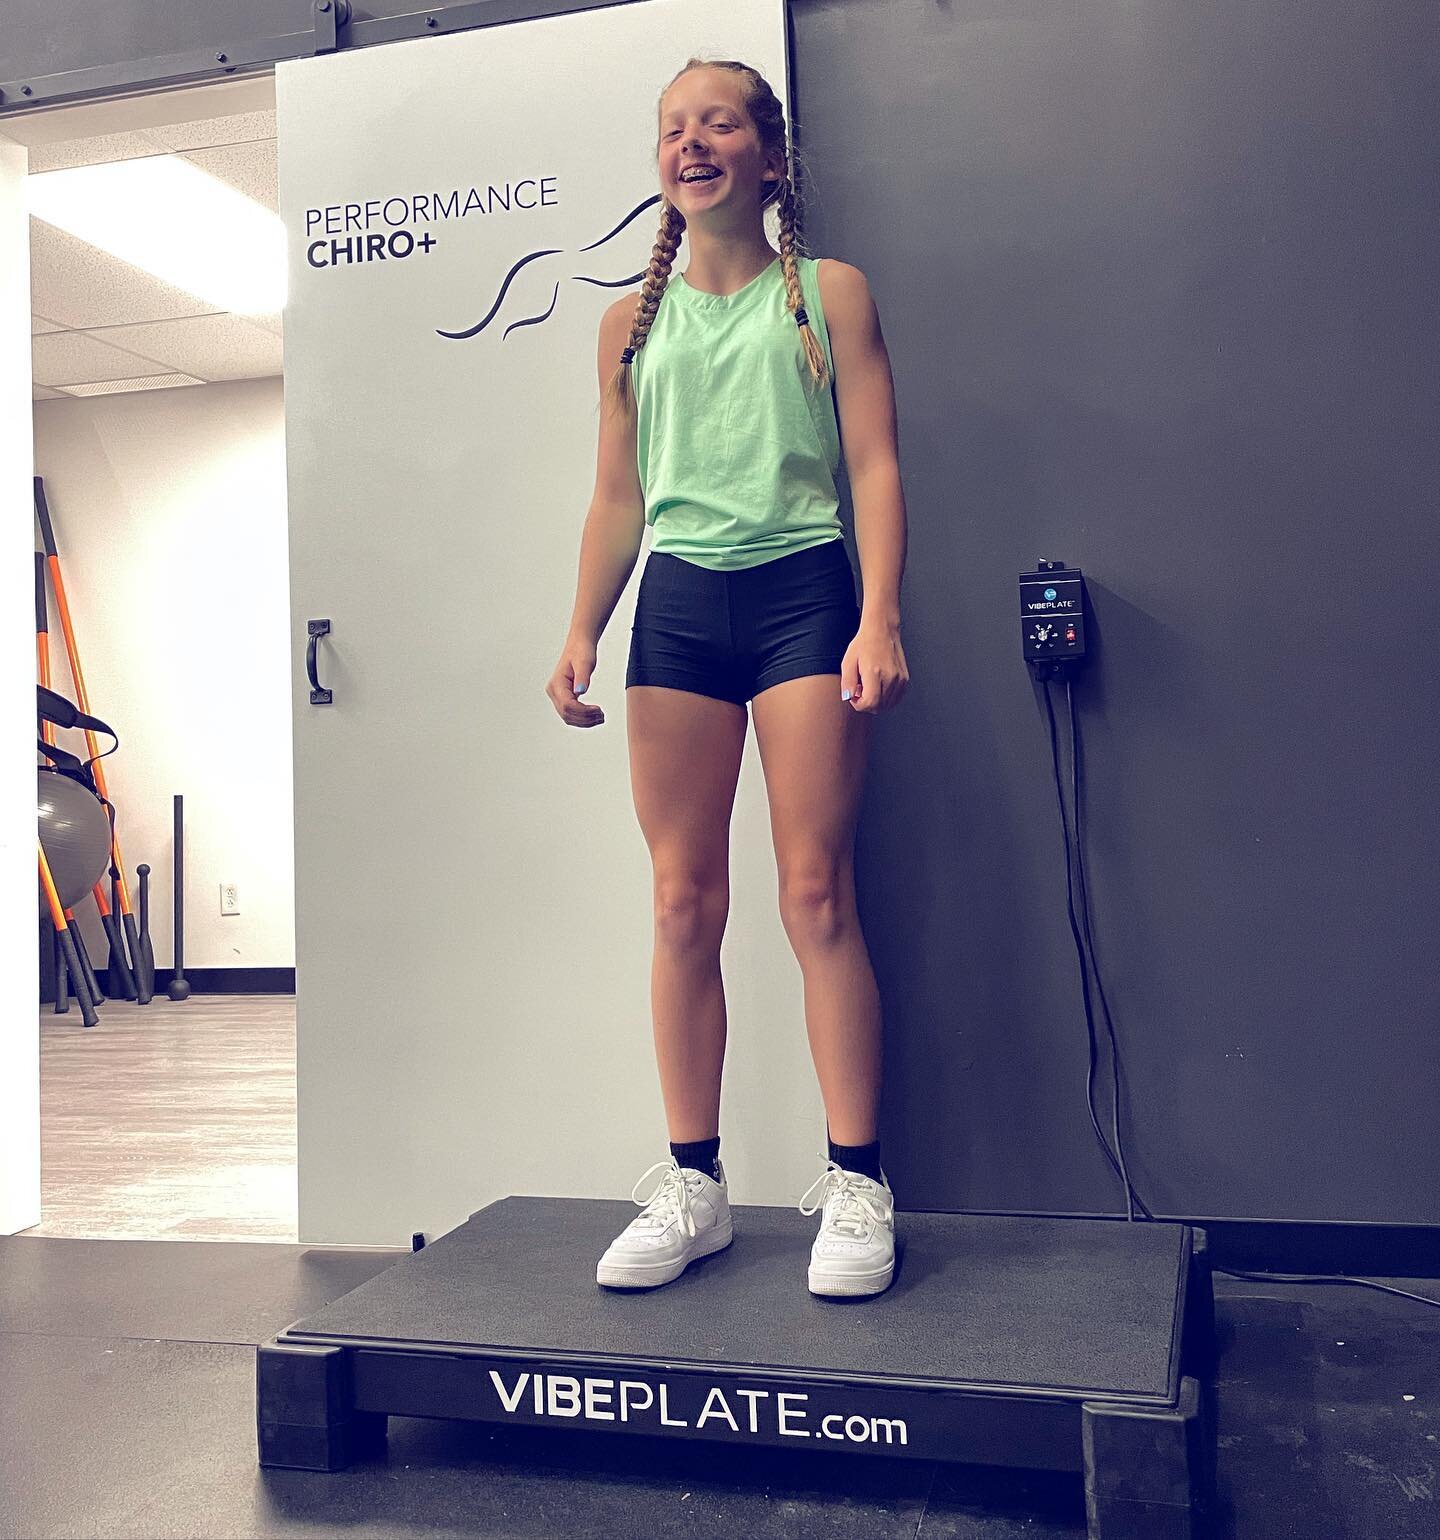 All smiles after a tune-up with Dr. P! 
When&rsquo;s your next tune-up?! 

#chiropractor #sportschiro #sportsmed #gymnastics #gymnast #muscle #sport #spine #performance #trainsmart #health #movement #adjustment #vibeplate #mobility #sportscare